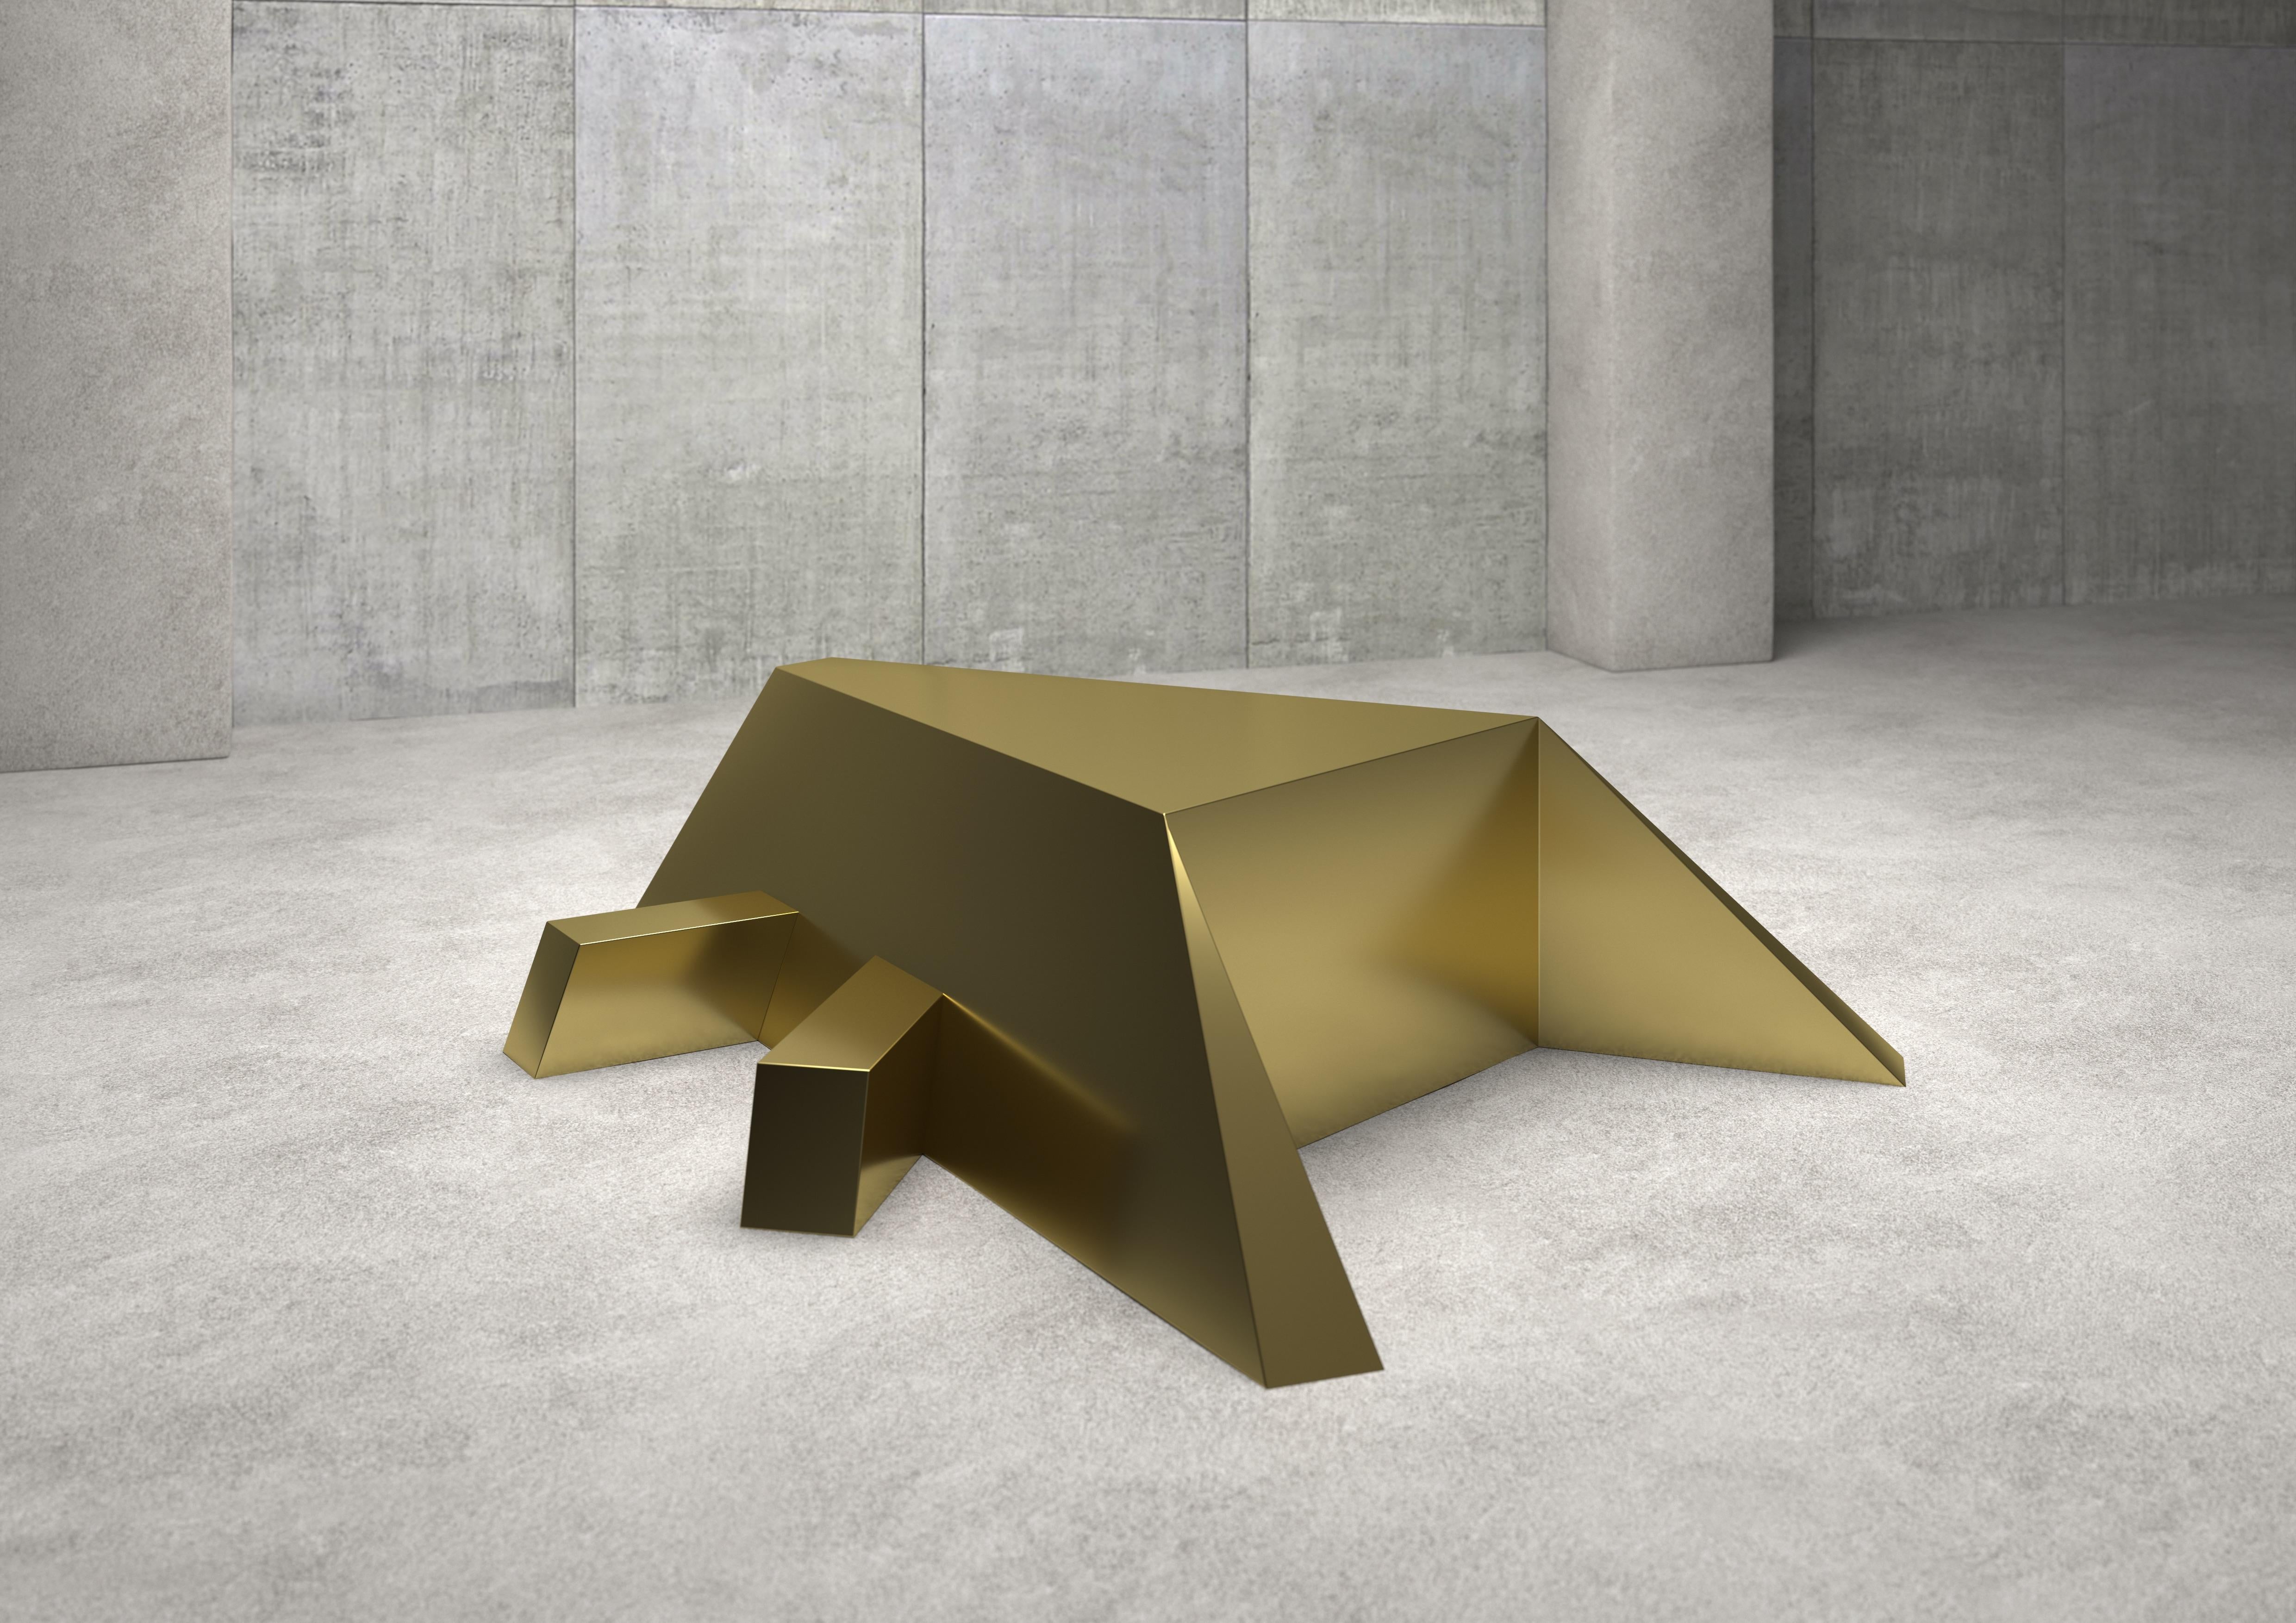 Insetto B sculpture coffee table totally in satin brass from the Nature collection designed by Sergio Ragalzi. Limited edition of three pieces. Produced for Superego Editions.
Numbered and signed.

Biography
Sergio Ragalzi was born in Turin in